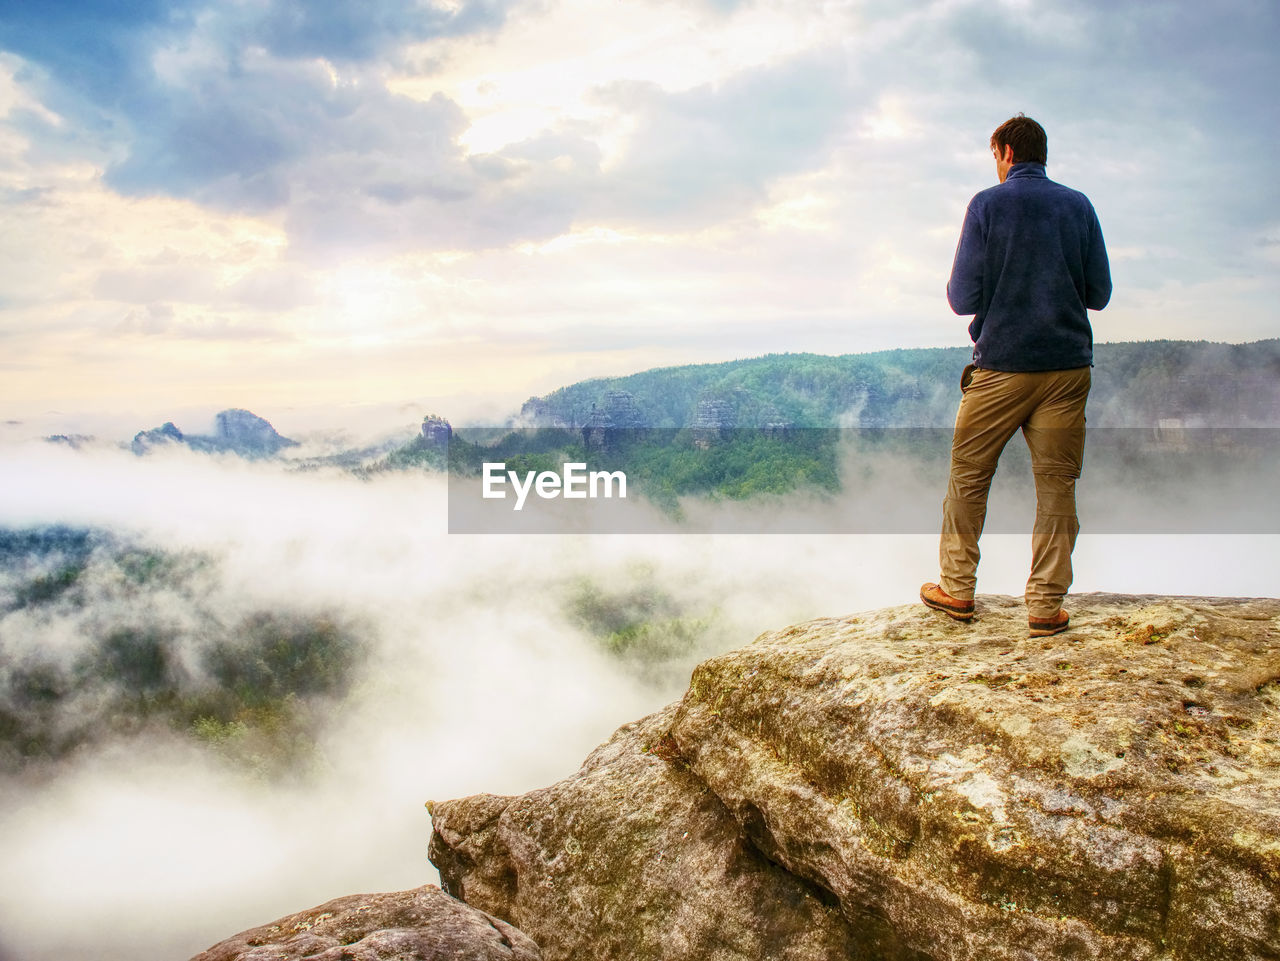 Photographer bend head check display of camera. man on cliff takes autumn beautiful photos of mist